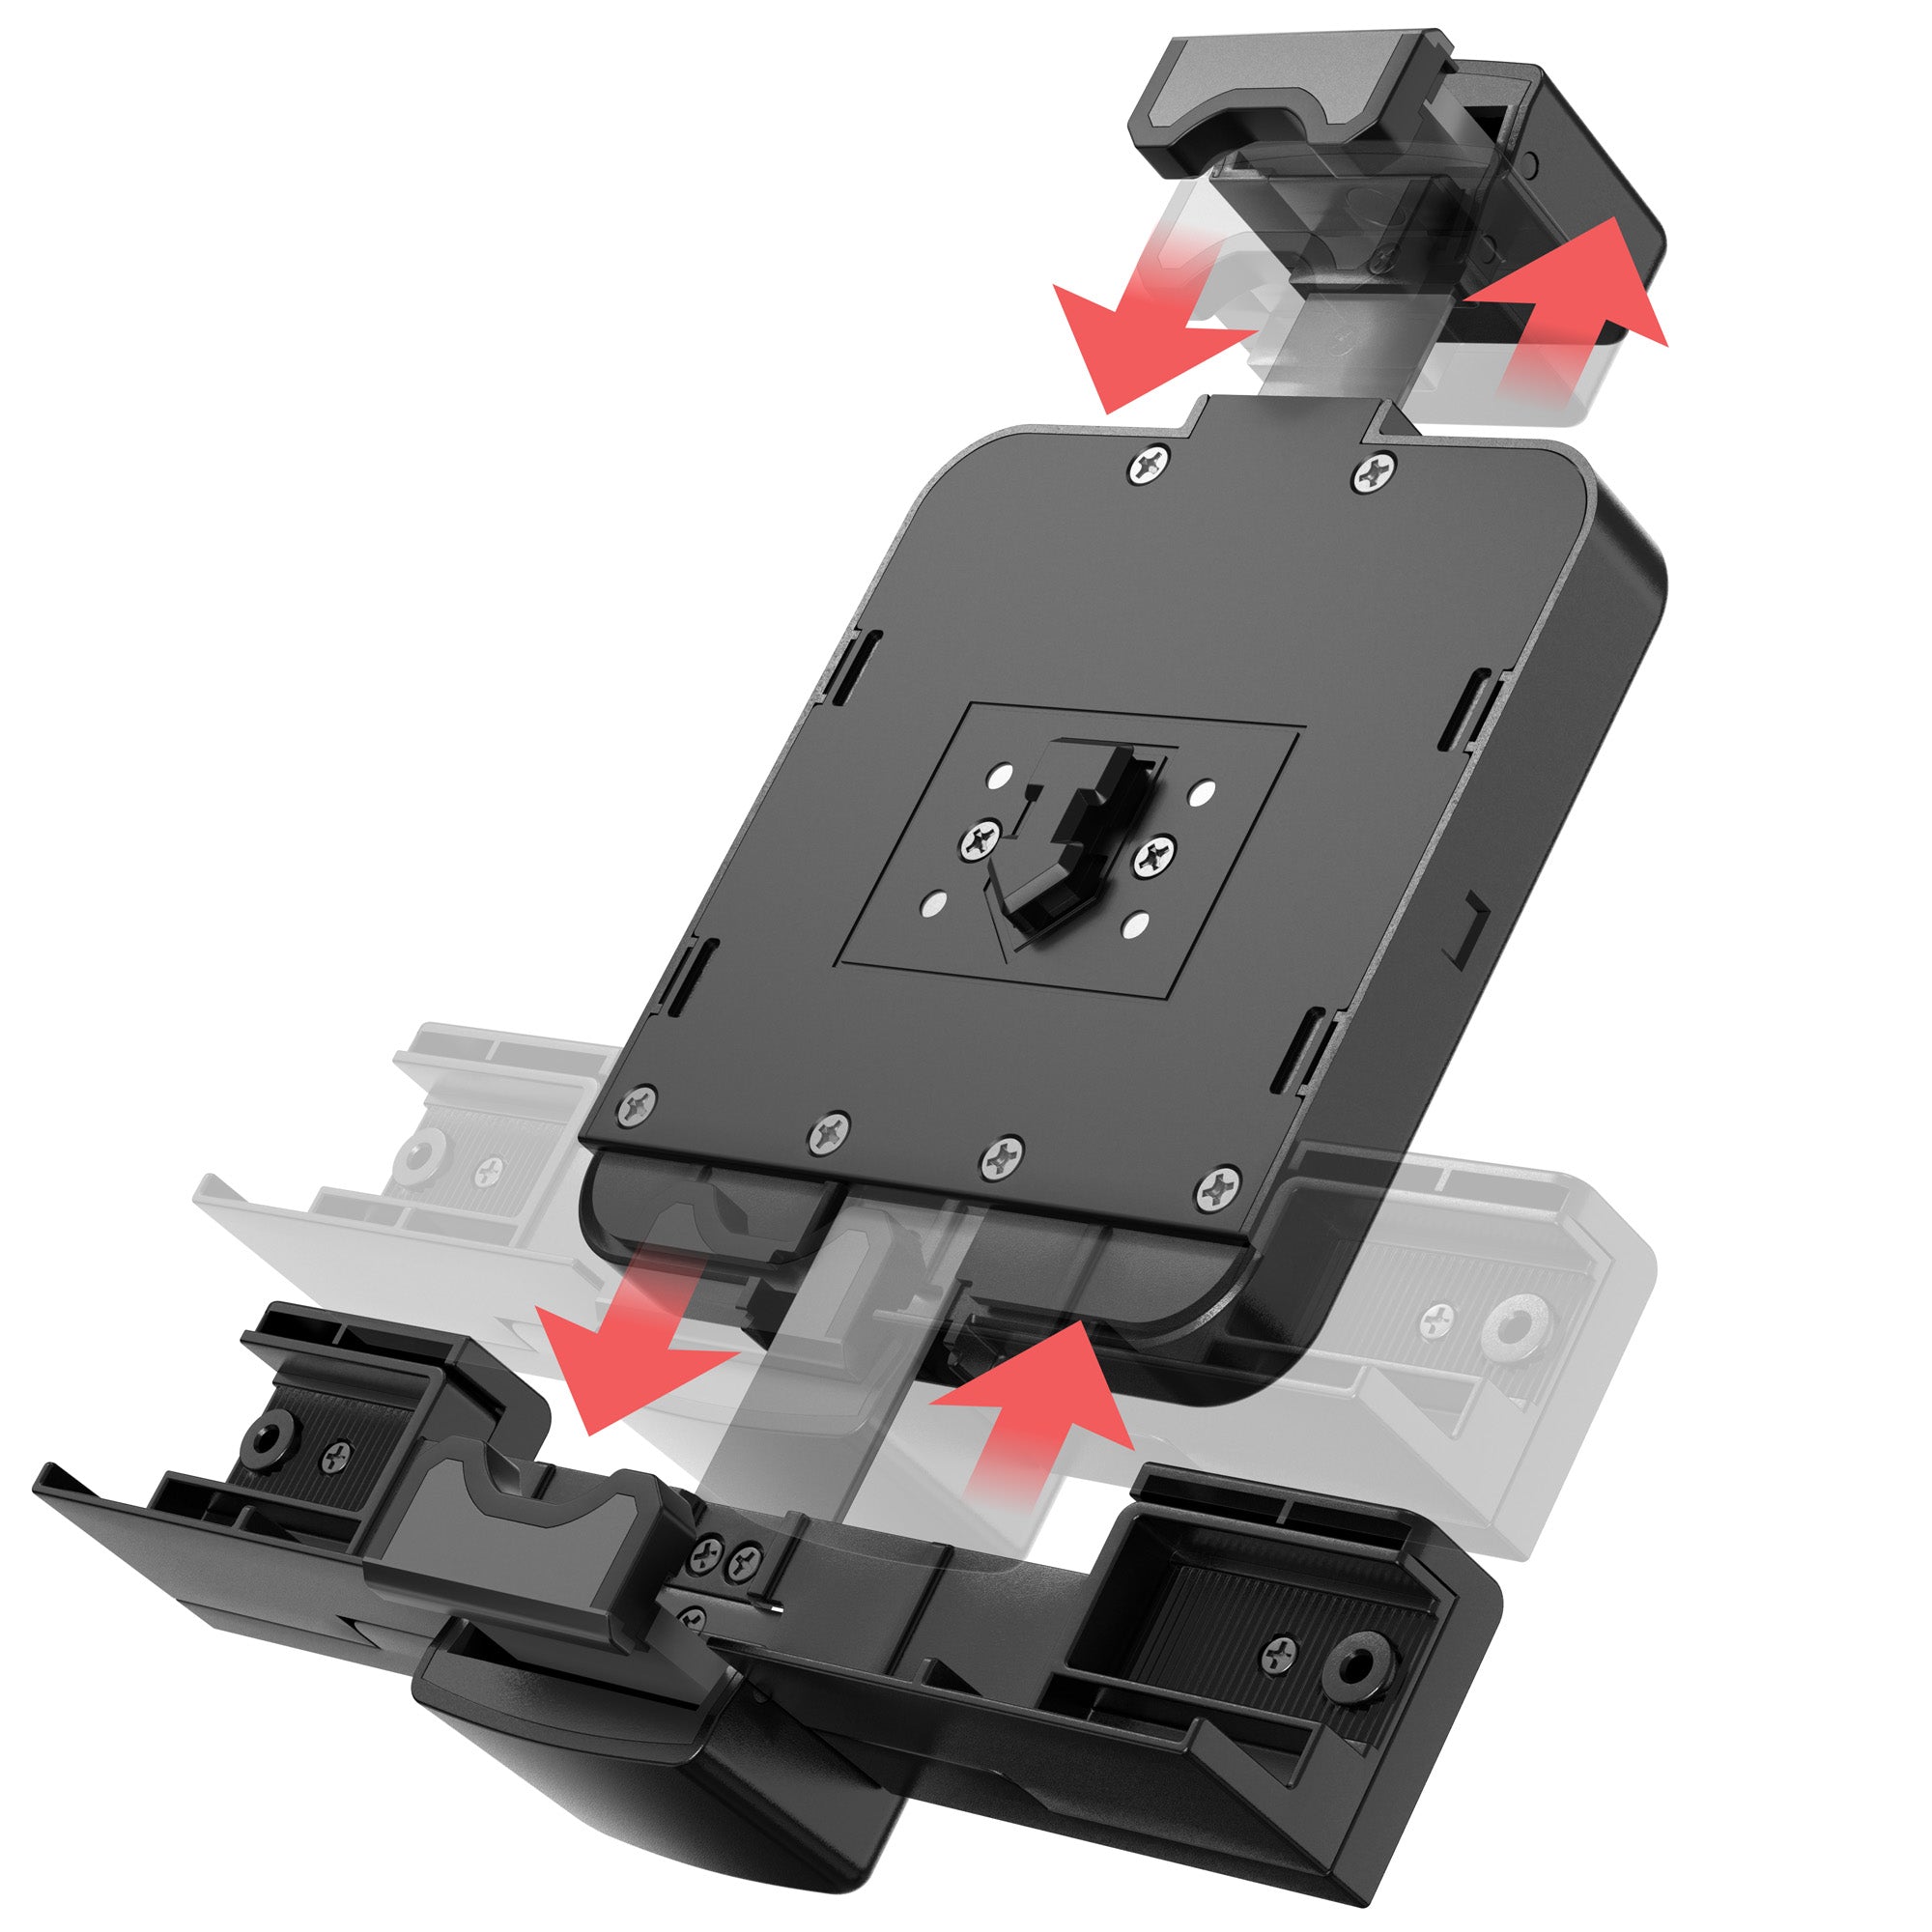 Custom Flex Vehicle Mount with Security Holder for Otterbox uniVERSE and Defender Series Cases